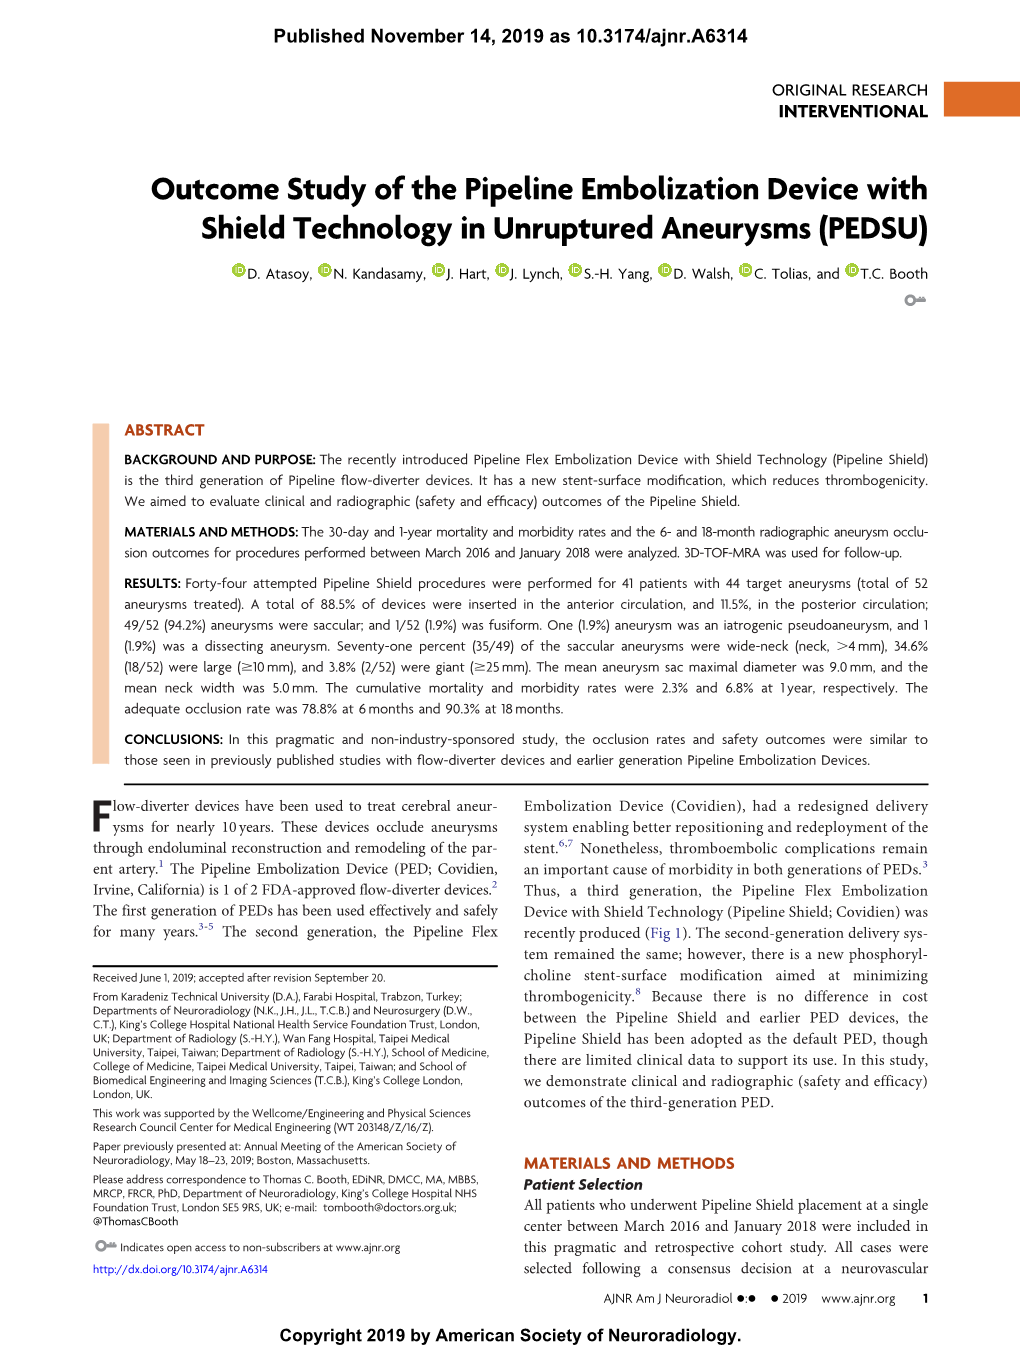 Outcome Study of the Pipeline Embolization Device with Shield Technology in Unruptured Aneurysms (PEDSU)